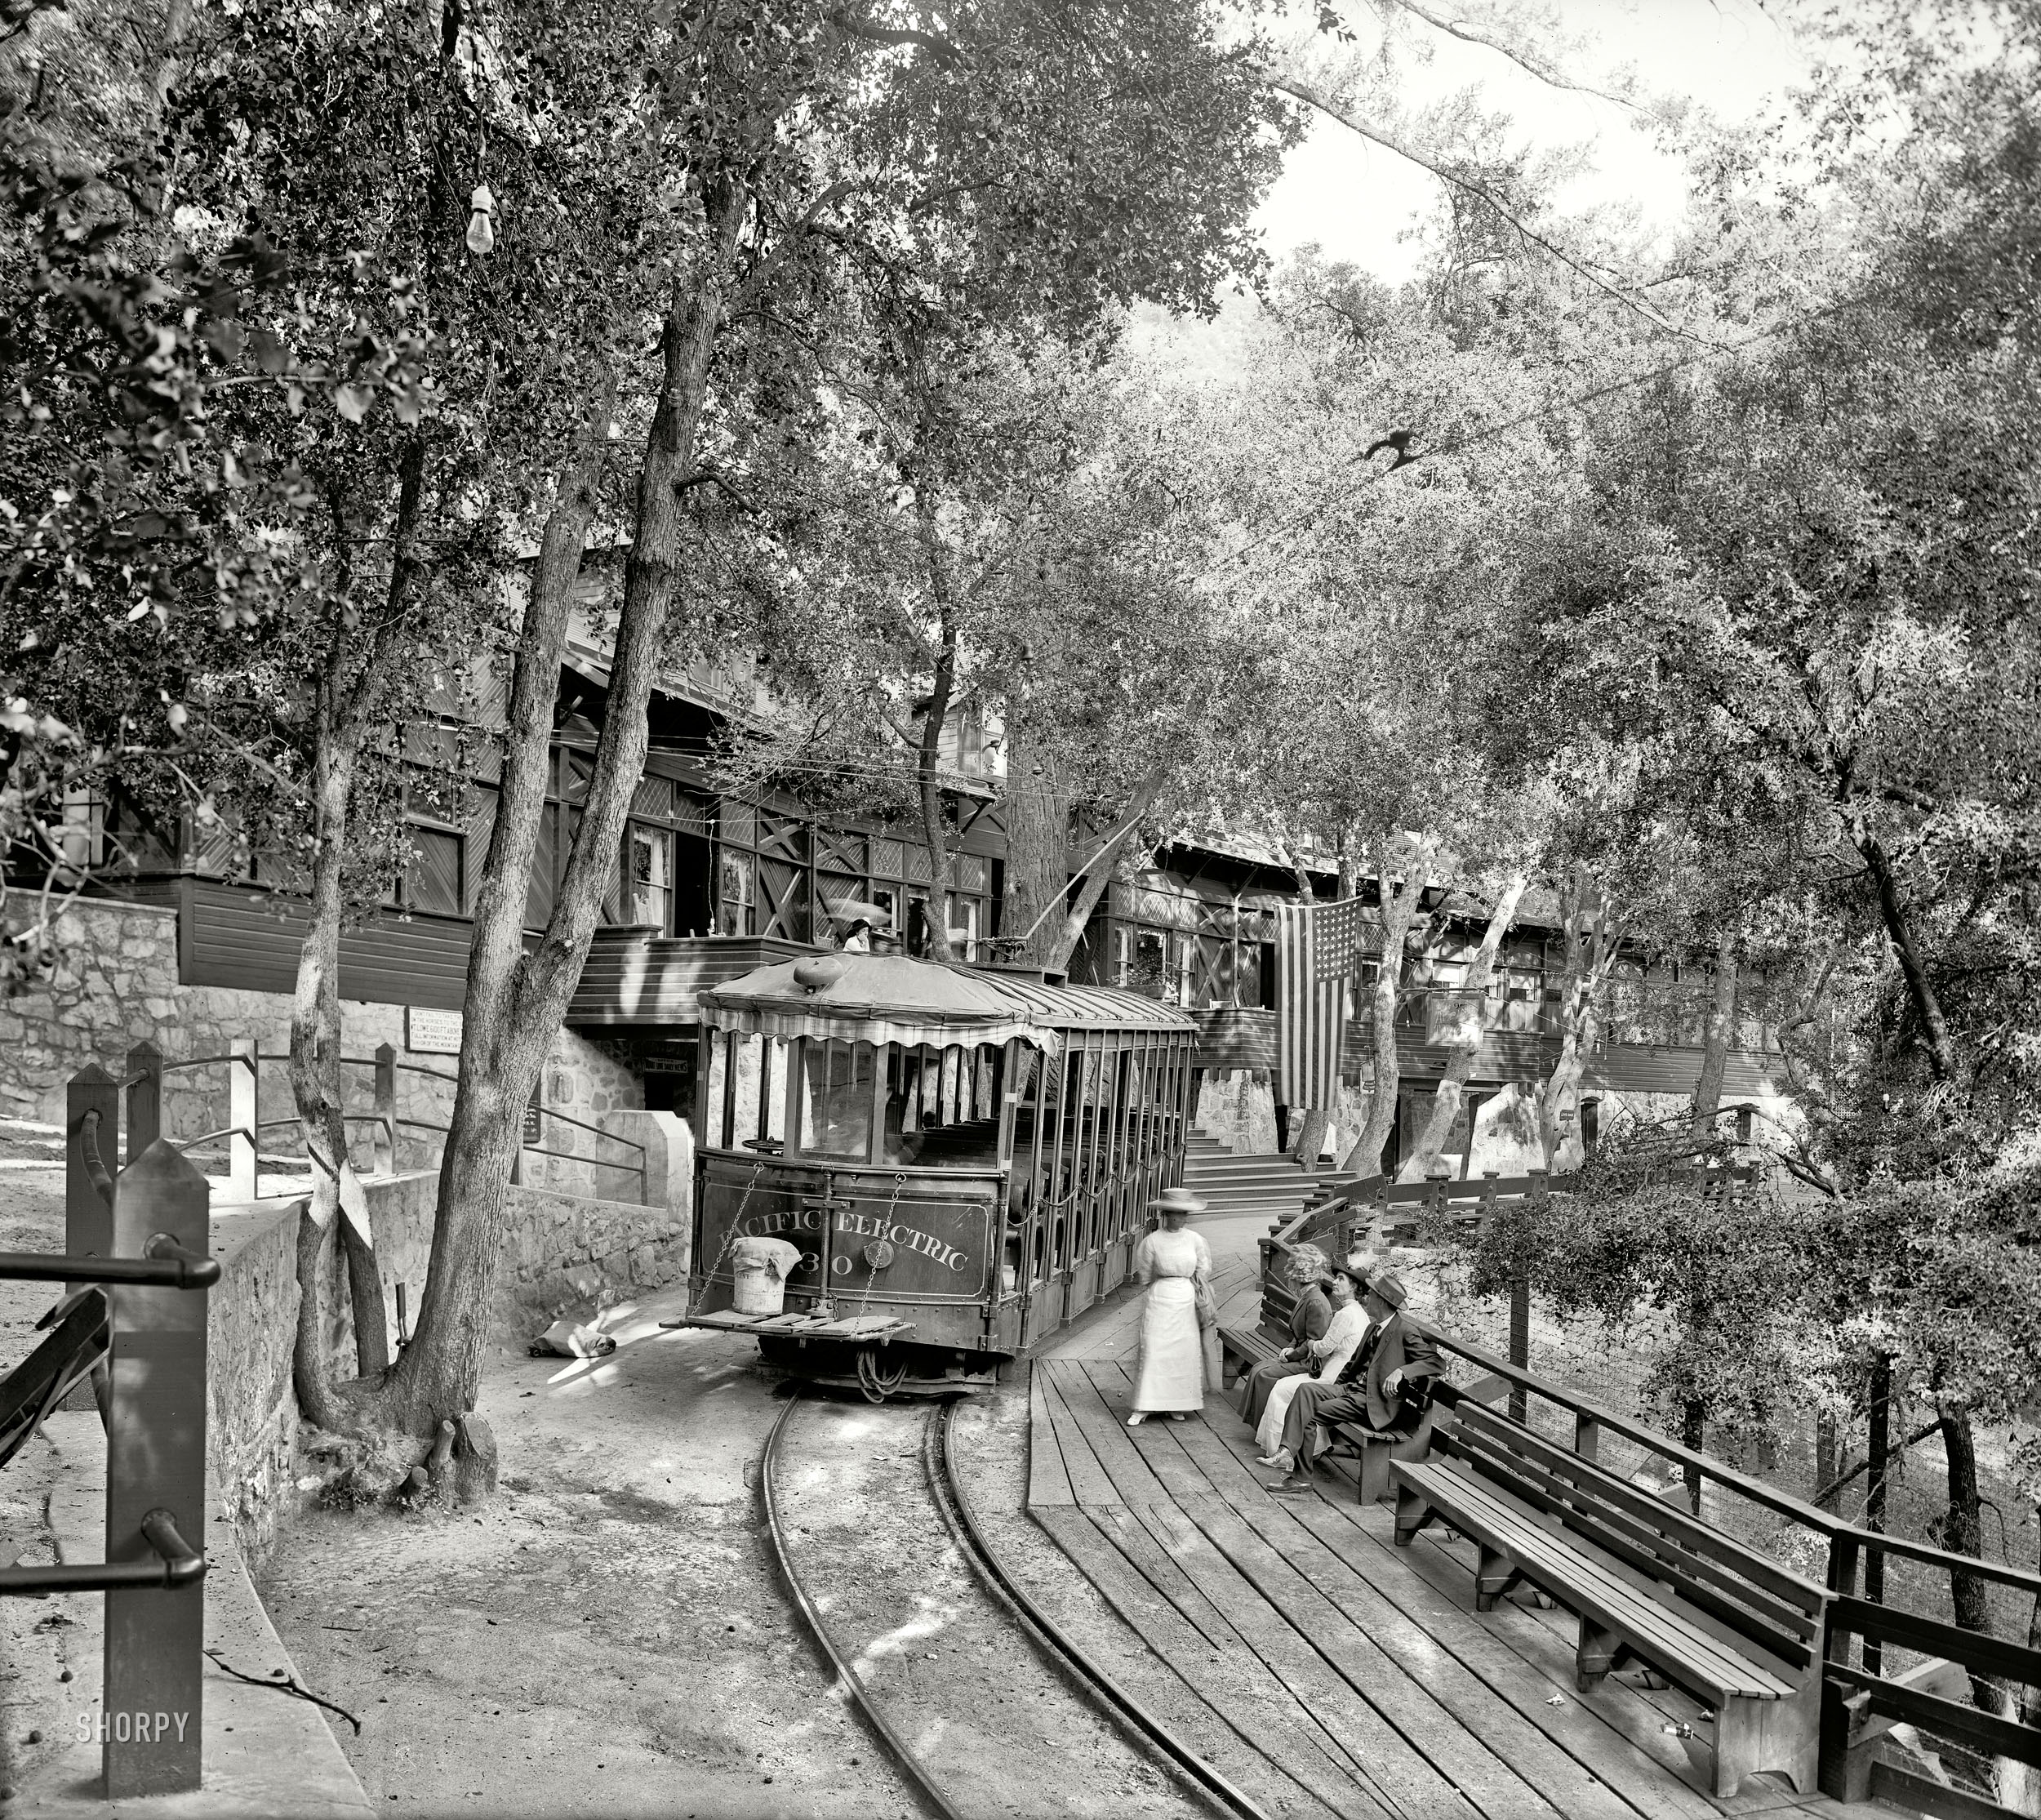 Mount Lowe, California, circa 1913. "Electric car at Ye Alpine Tavern, Mount Lowe Railway." This Swiss-style chalet in the San Gabriel Mountains was the upper terminus (elev. 5,000 feet) of an 1890s scenic and incline railway that started in Altadena, with streetcar connections all the way to the main terminal at the Pacific Electric Building in Los Angeles. The railway and associated resorts, including the 70-room Echo Mountain House, were gradually obliterated by fire and flood until, by 1940, nothing was left. Detroit Publishing Co. View full size.